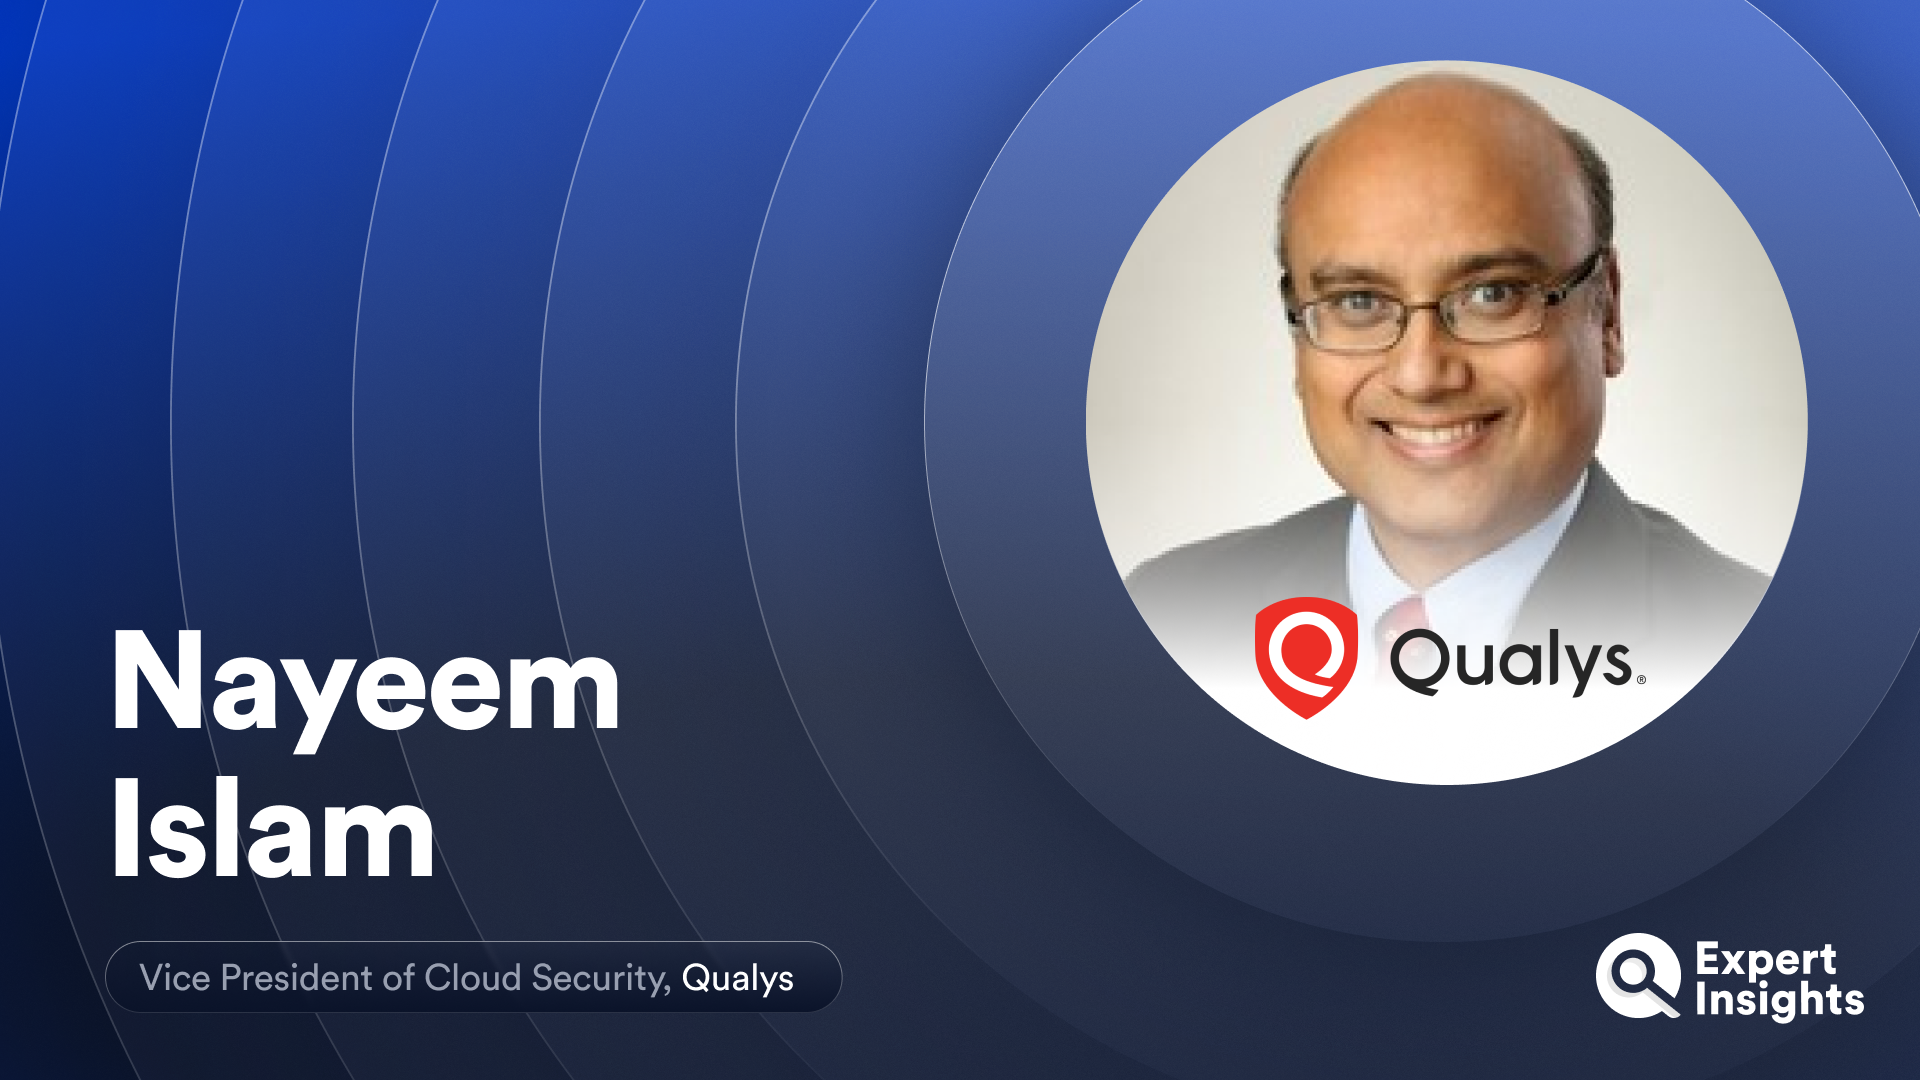 Expert Insights Interview with Nayeem Islam of Qualys